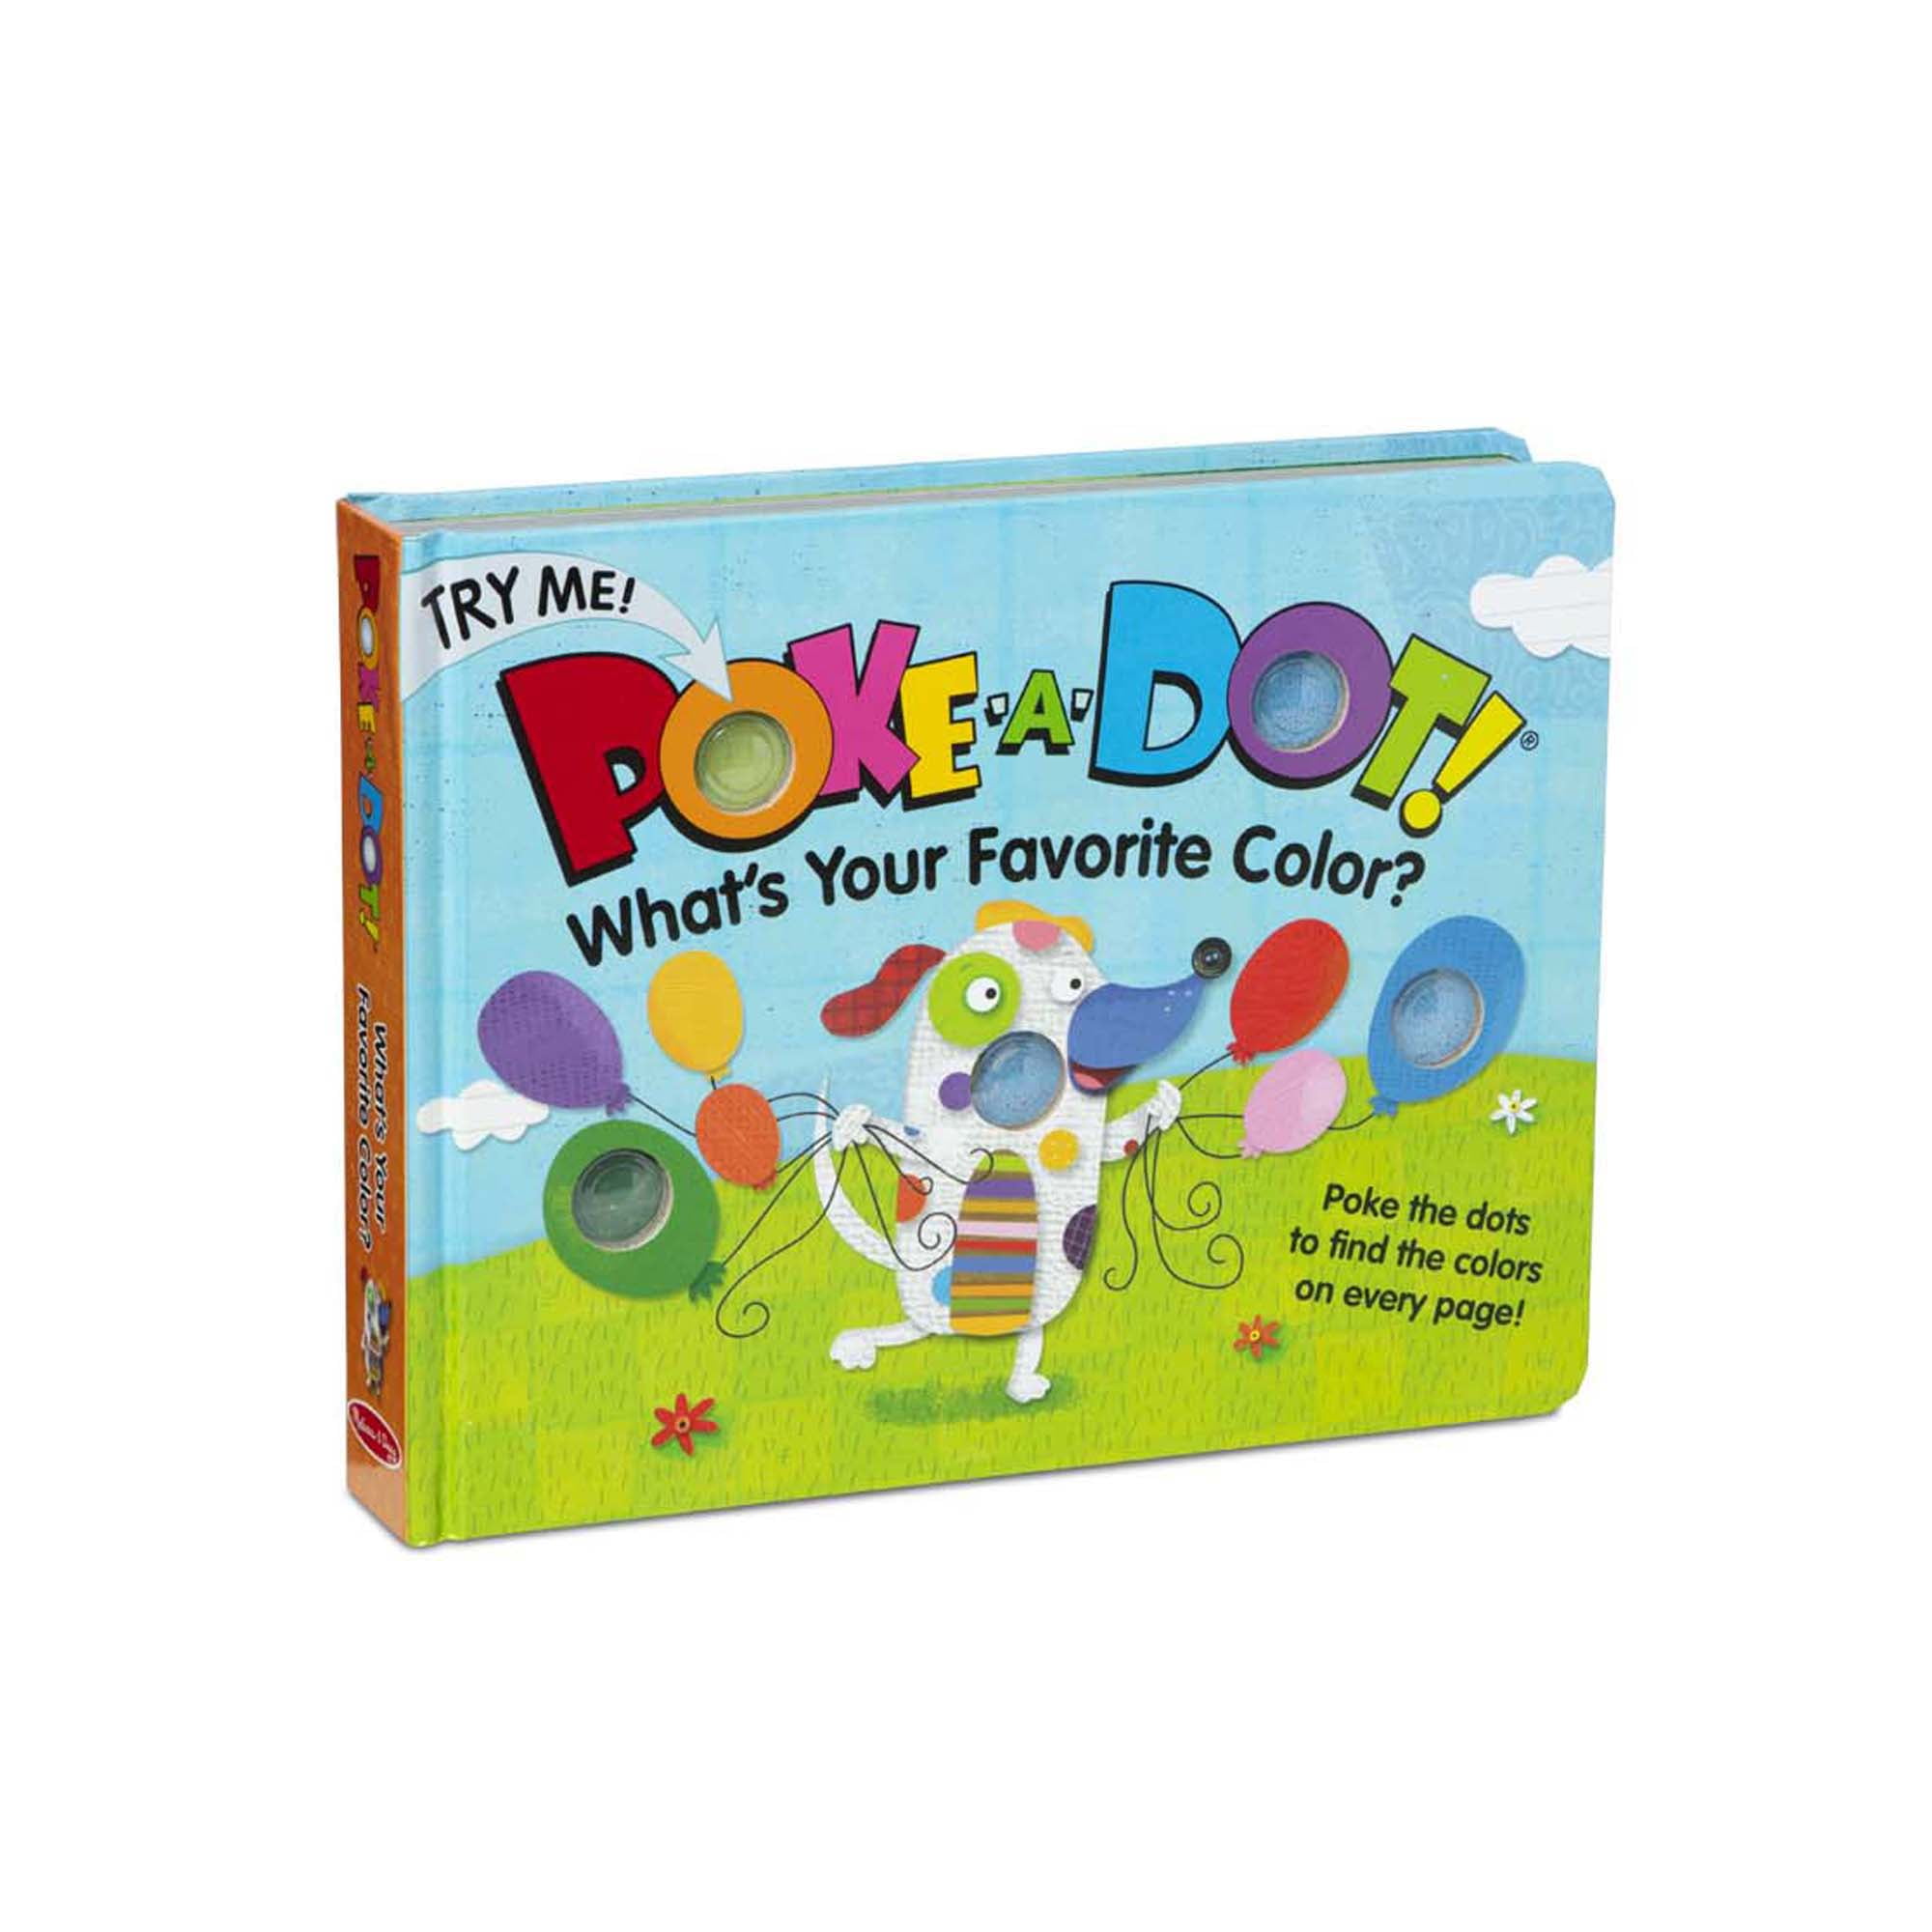 Melissa & Doug Children's Book - Poke-a-Dot: What’s Your Favorite Color  (Board Book with Buttons to Pop)